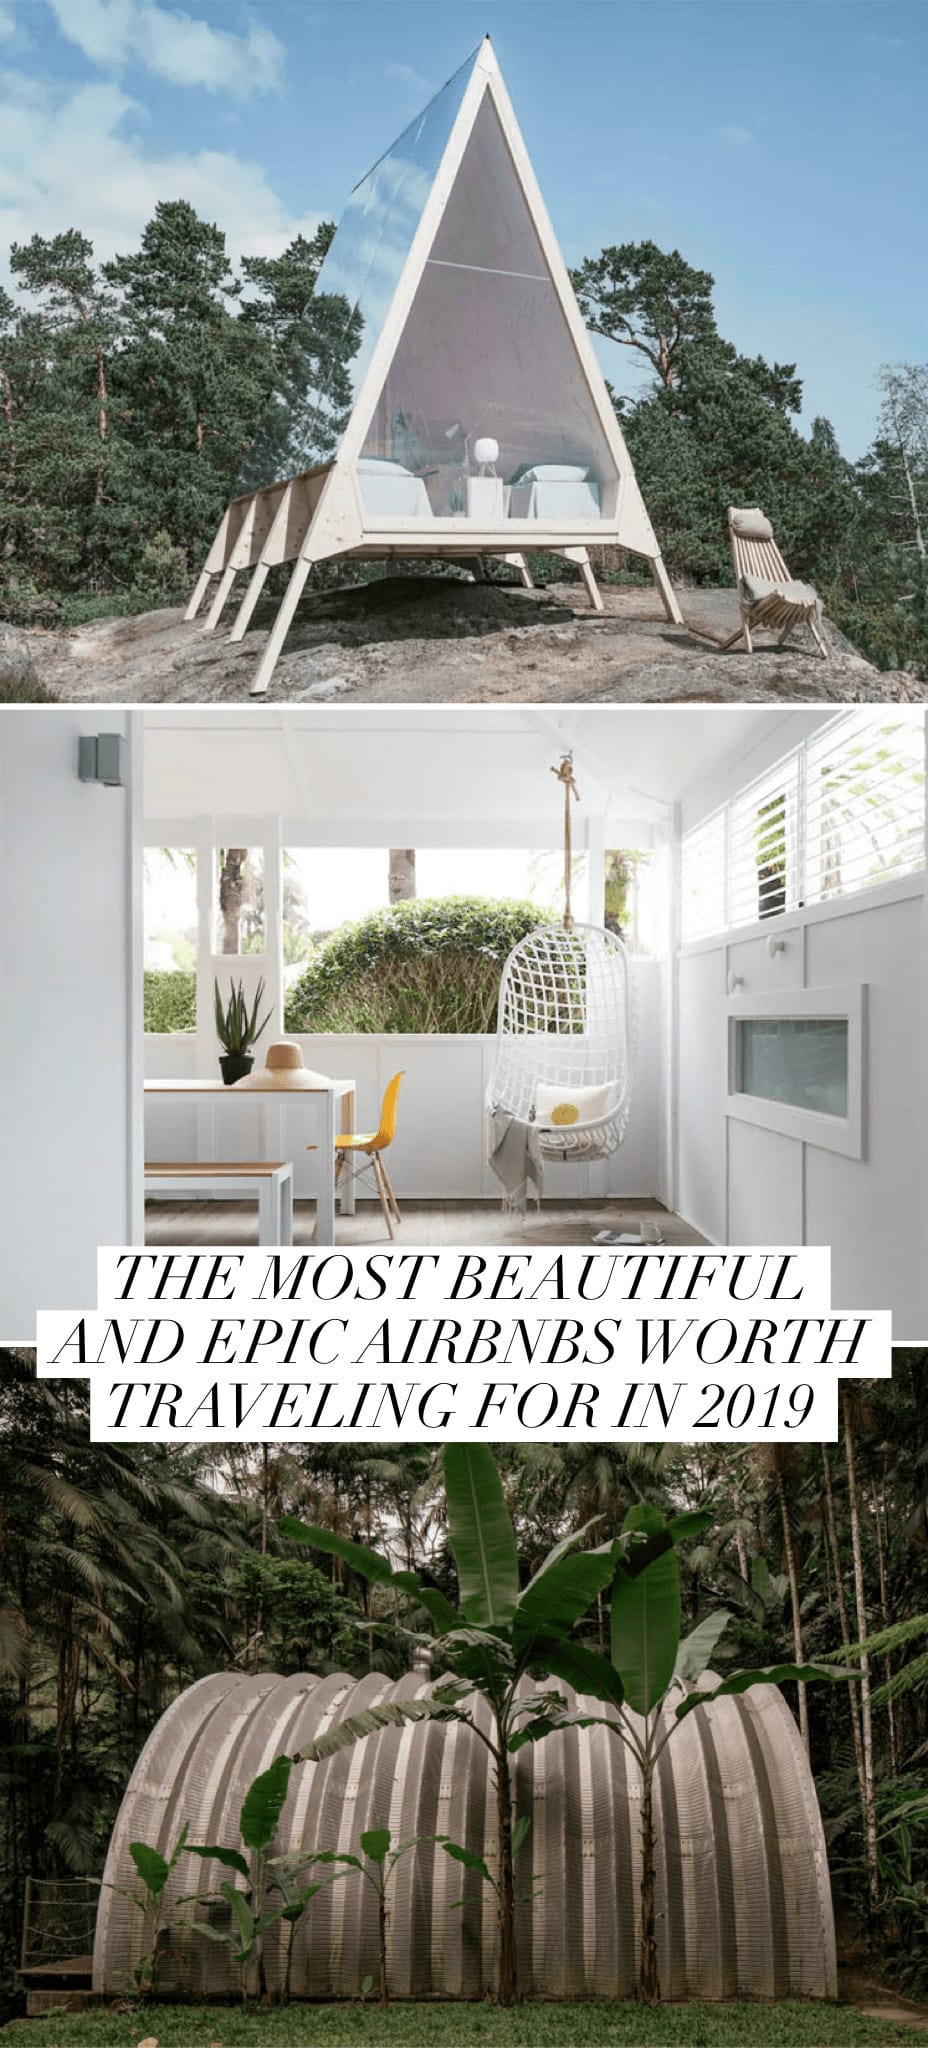 The Most Beautiful and Epic Airbnbs Worth Traveling For in 2019 | Epic Airbnb rentals | Most beautiful Airbnb rentals around the world | Coolest Airbnbs around the globe | Unique Airbnbs | Best Airbnbs to rent in 2019 | Airbnb design | Airbnb tips | Airbnb Ideas